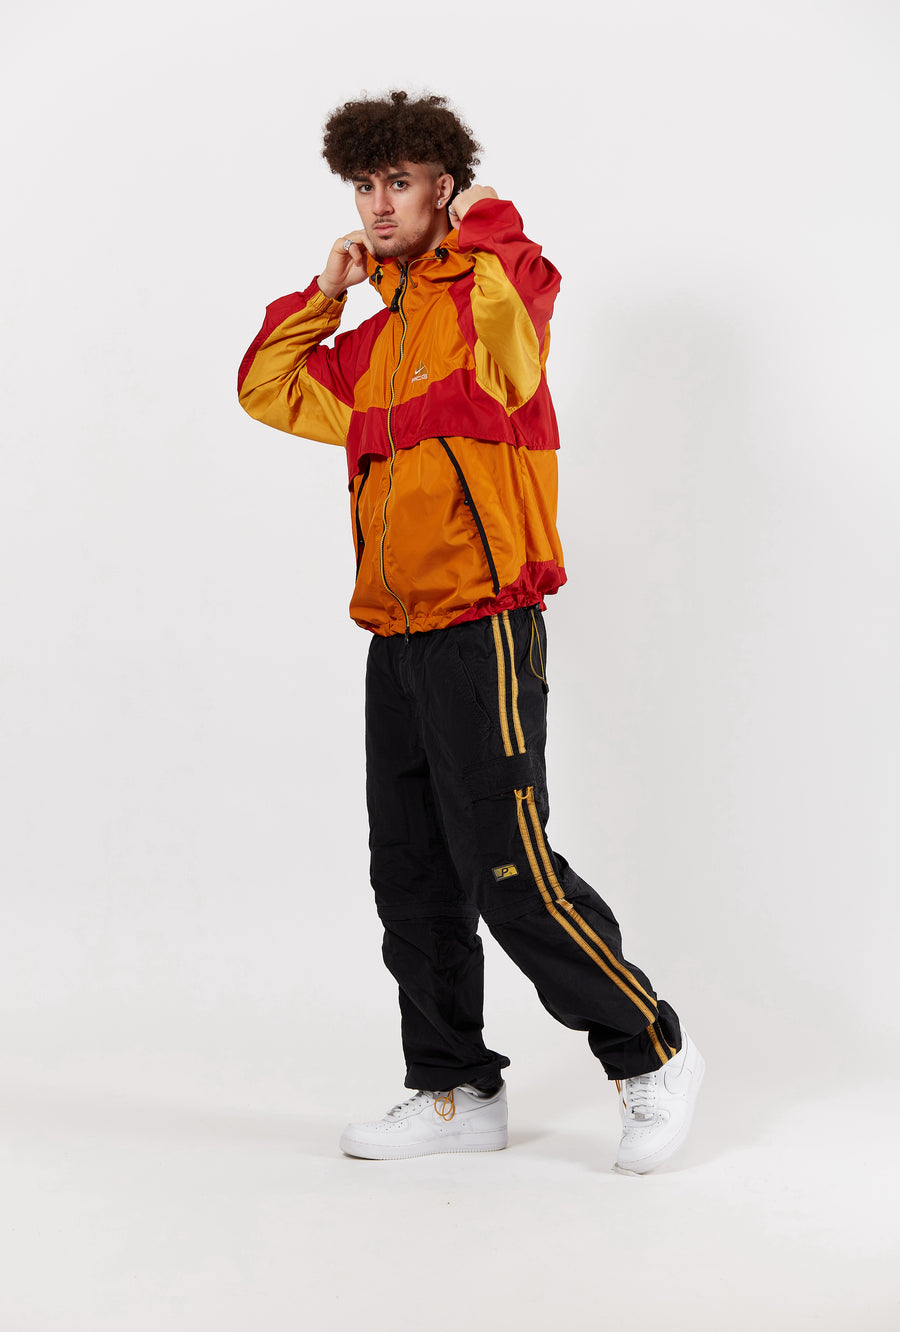 Nike ACG All Condition Gear Layer 3 Windbreaker in a vintage style from thrift store Twise Studio